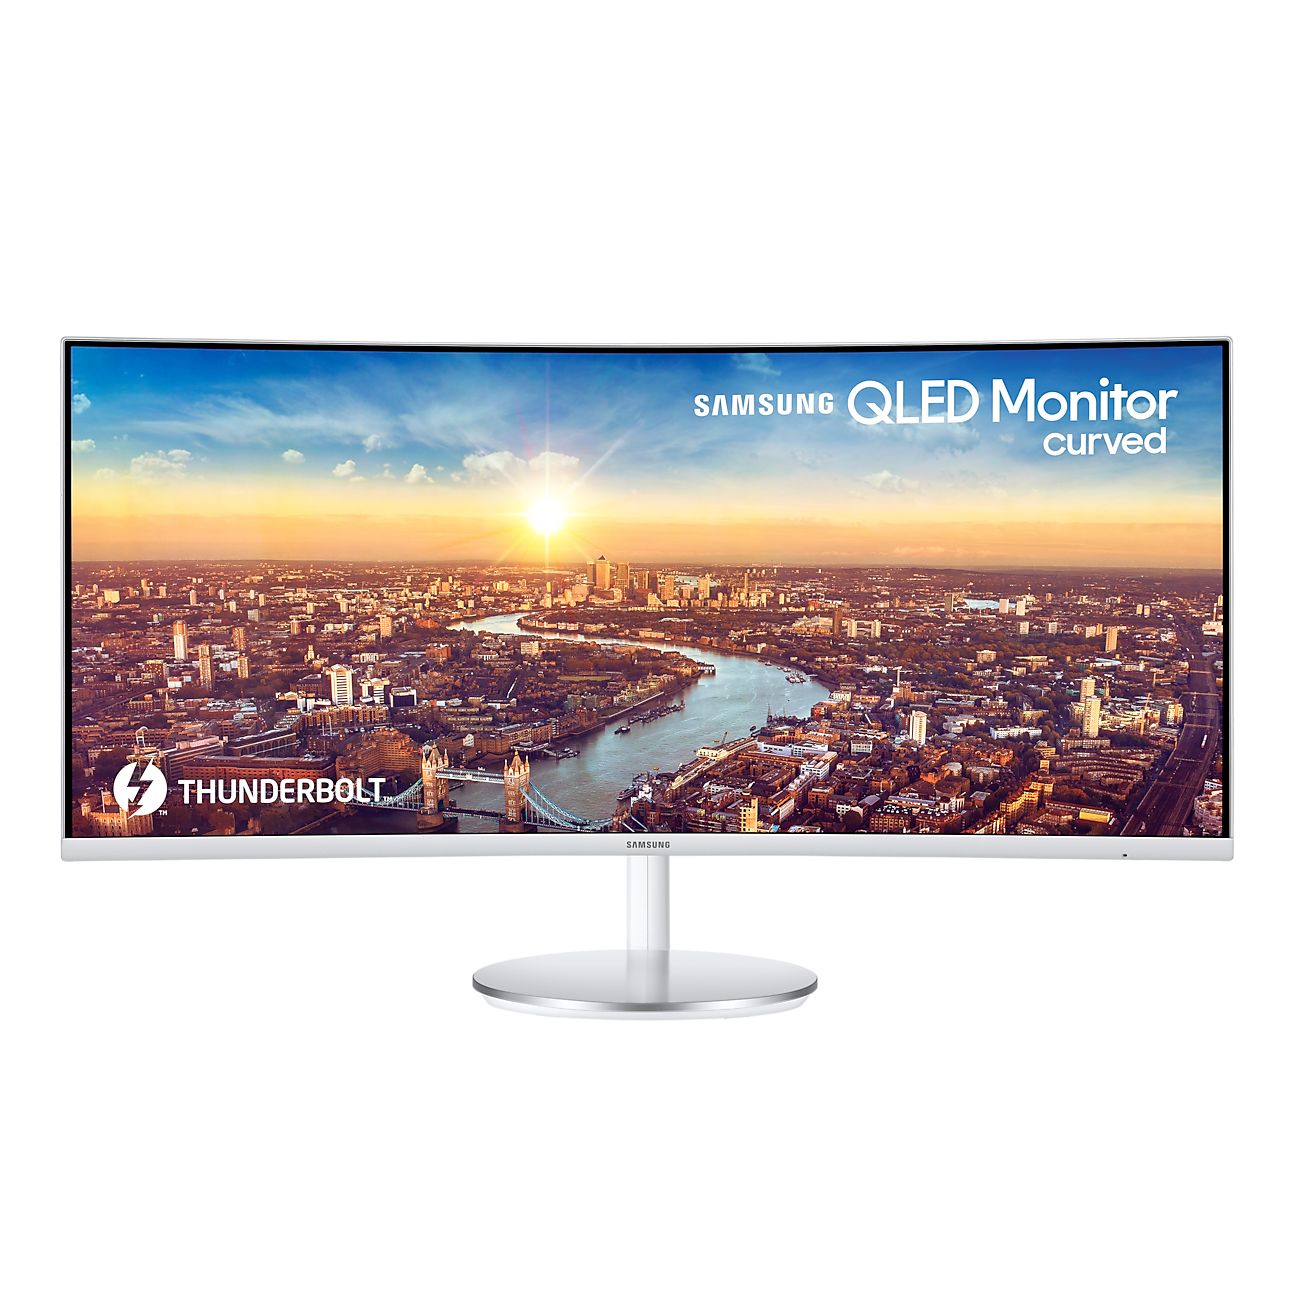 Samsumg Thunderbolt™ 3 Curved Monitor with 21:9 Wide Screen, 34 Inch, White